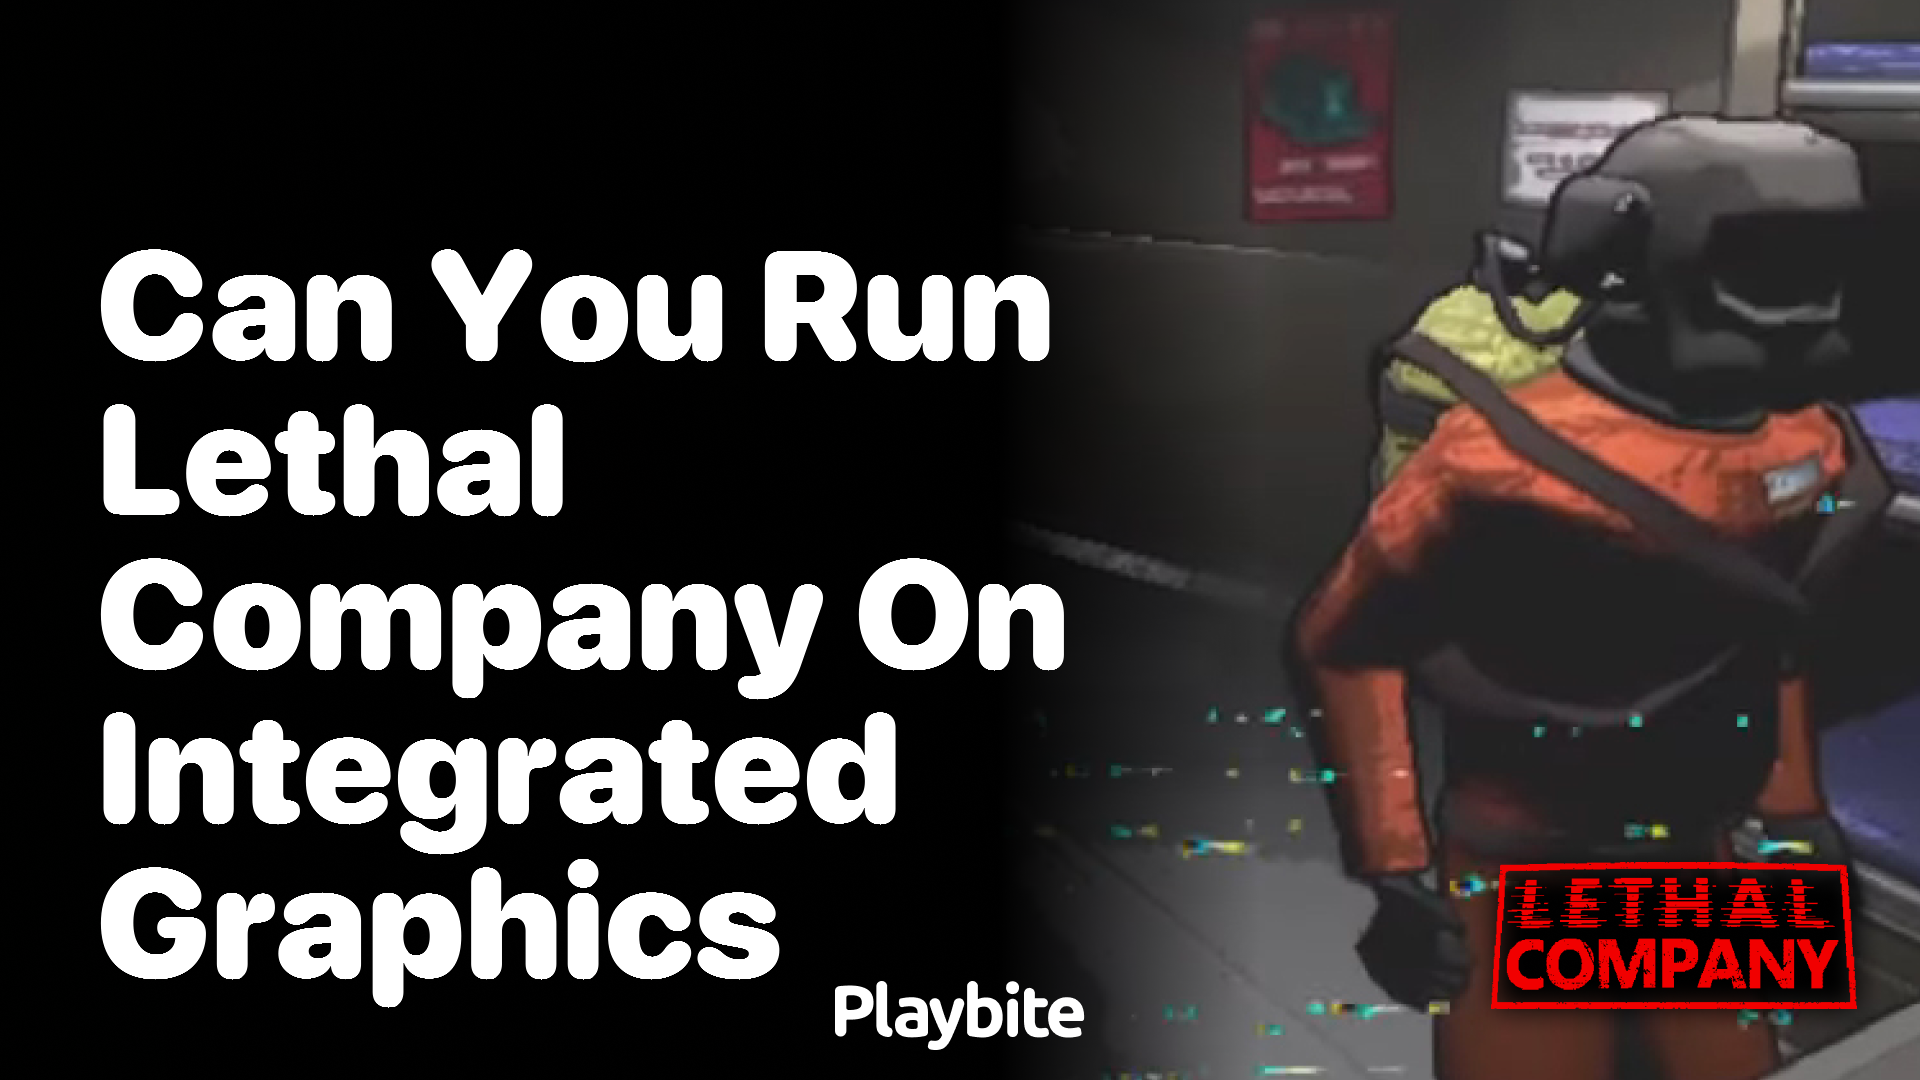 Can you run Lethal Company on integrated graphics?